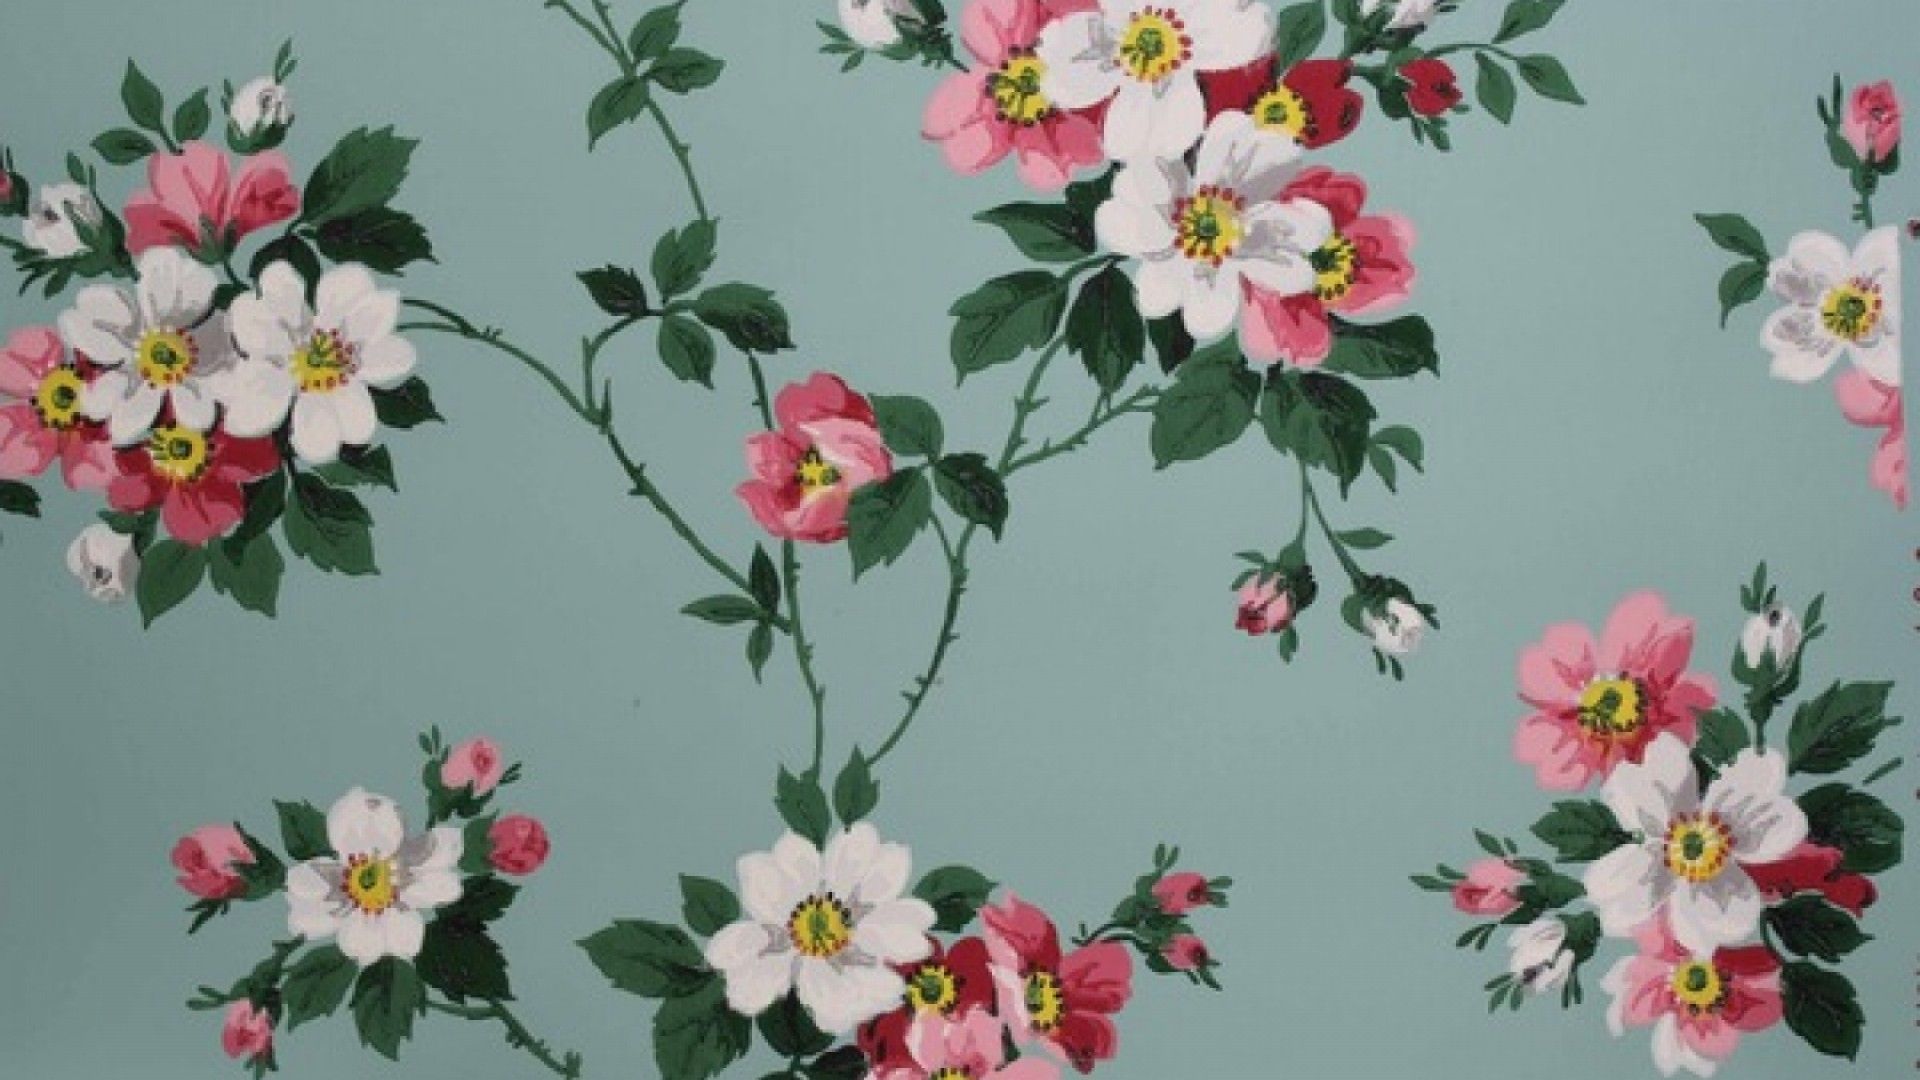 Collection Of Vintage Flowers Backgrounds, Vintage - Flower Vintage Wallpaper Desktop - HD Wallpaper 